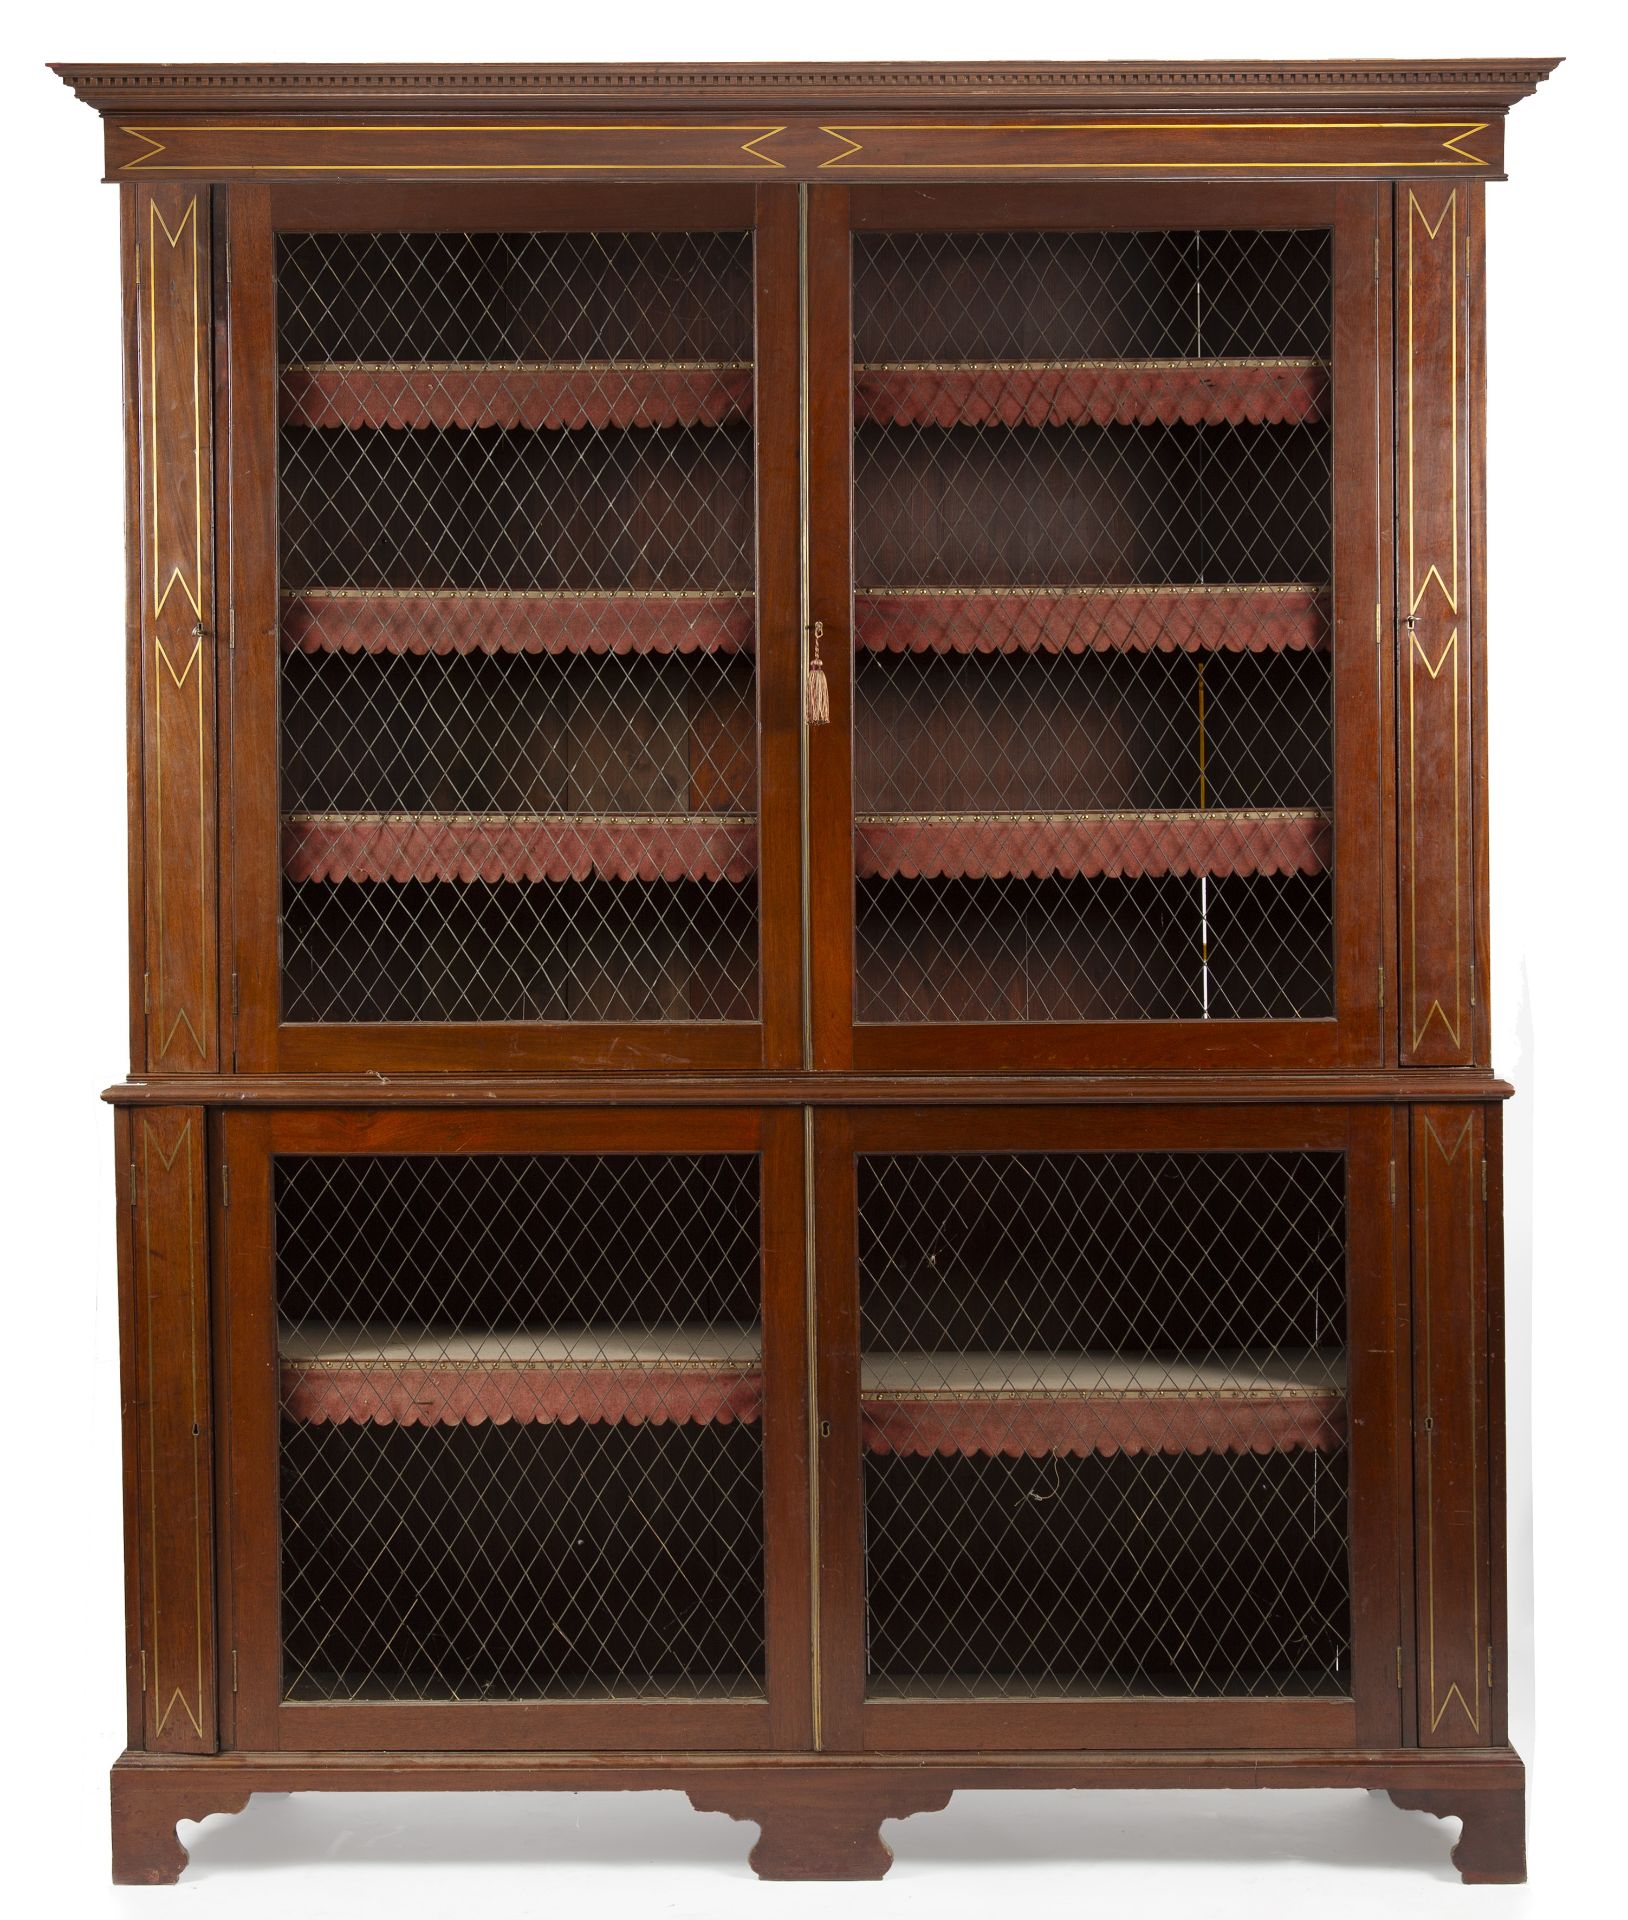 A Regency mahogany brass inlaid bookcase with adjustable shelves and wirework doors, all raised on